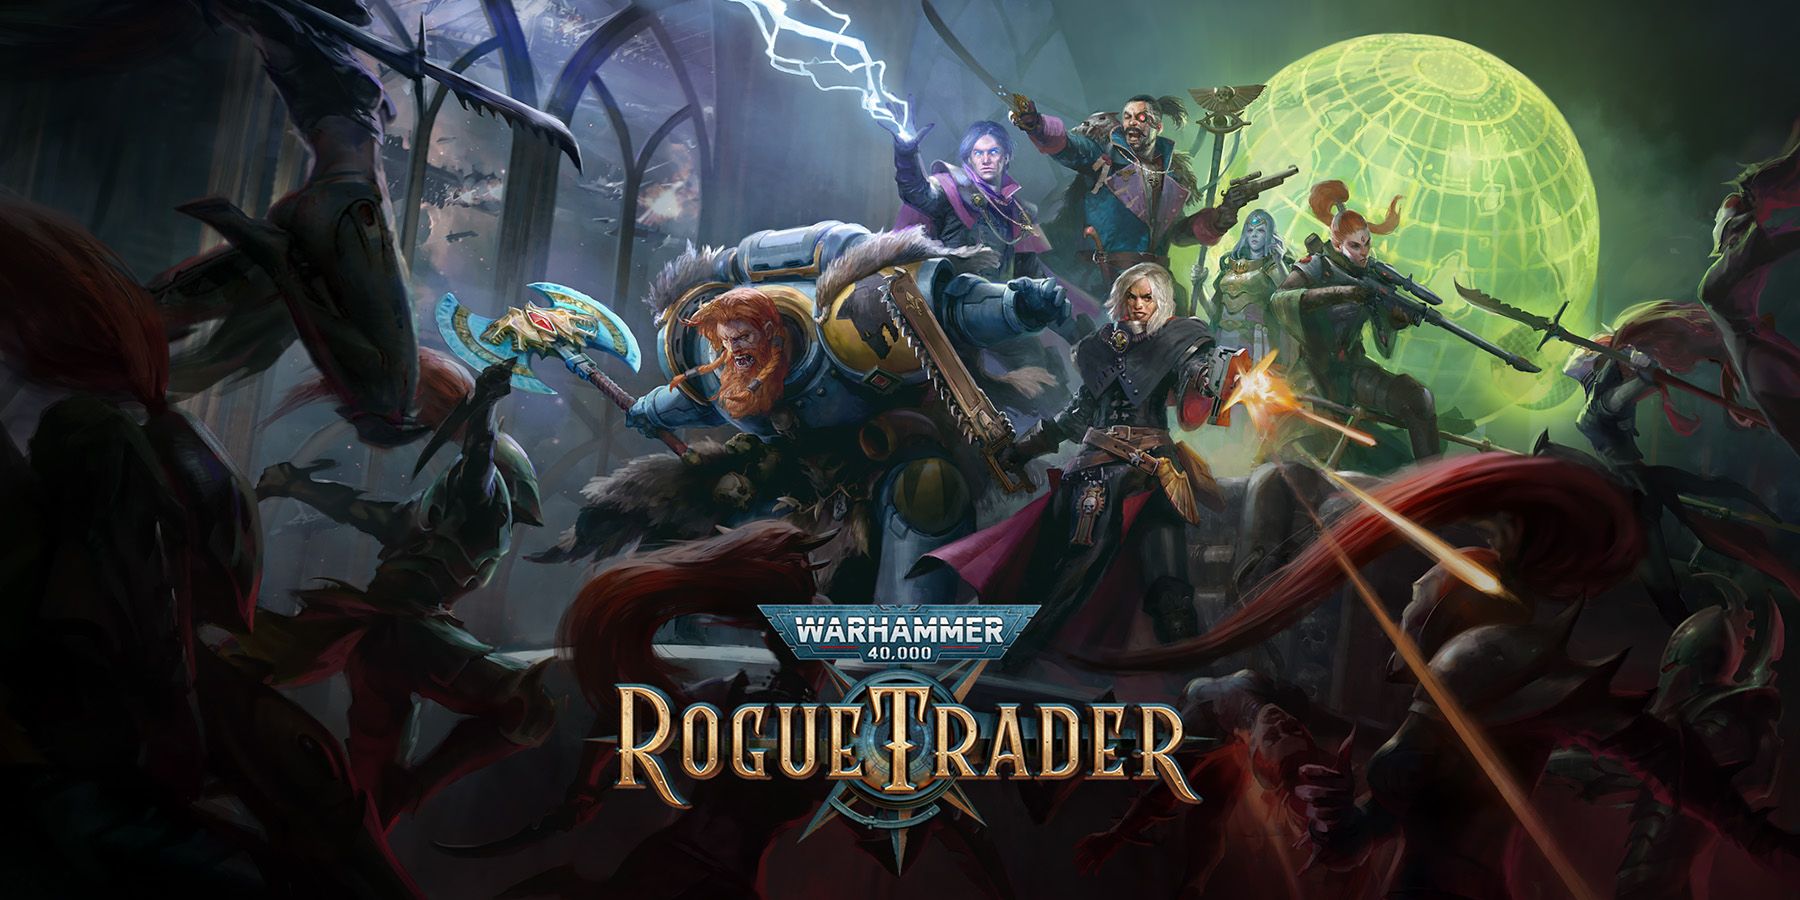 interview - warhammer 40,000: rogue trader devs talk lore, power fantasy, and difficulty